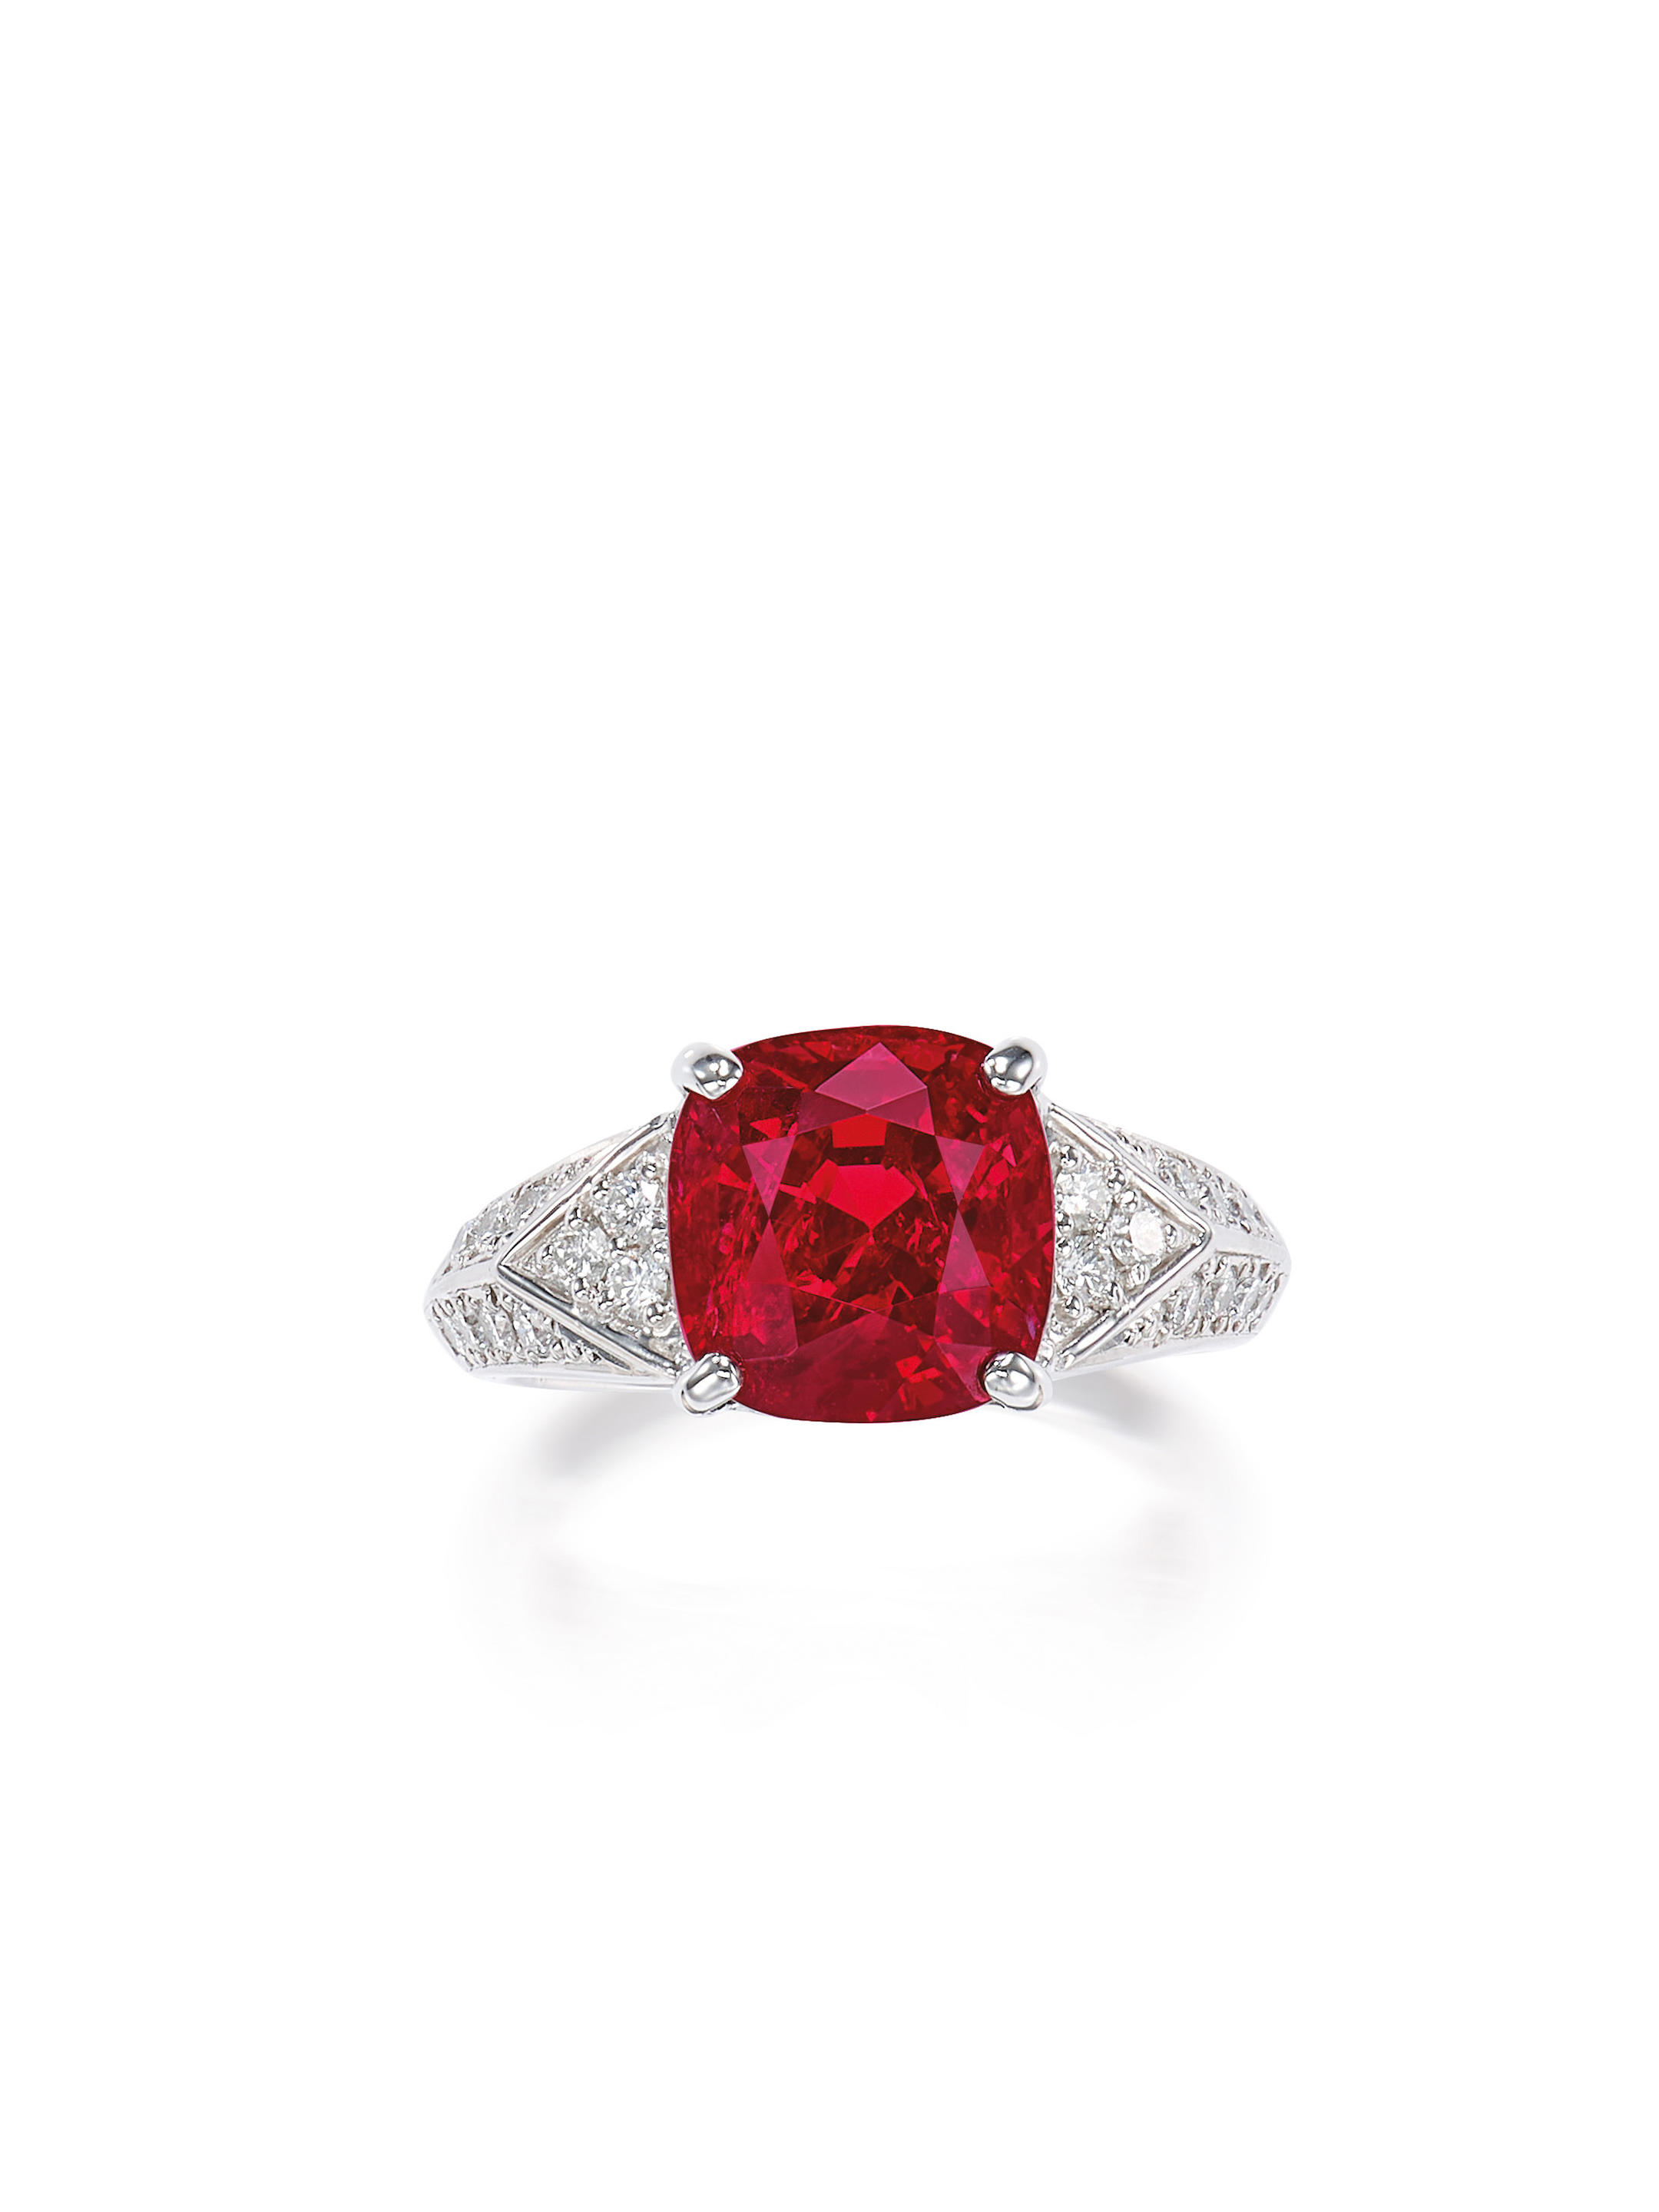 A SPINEL AND DIAMOND RING